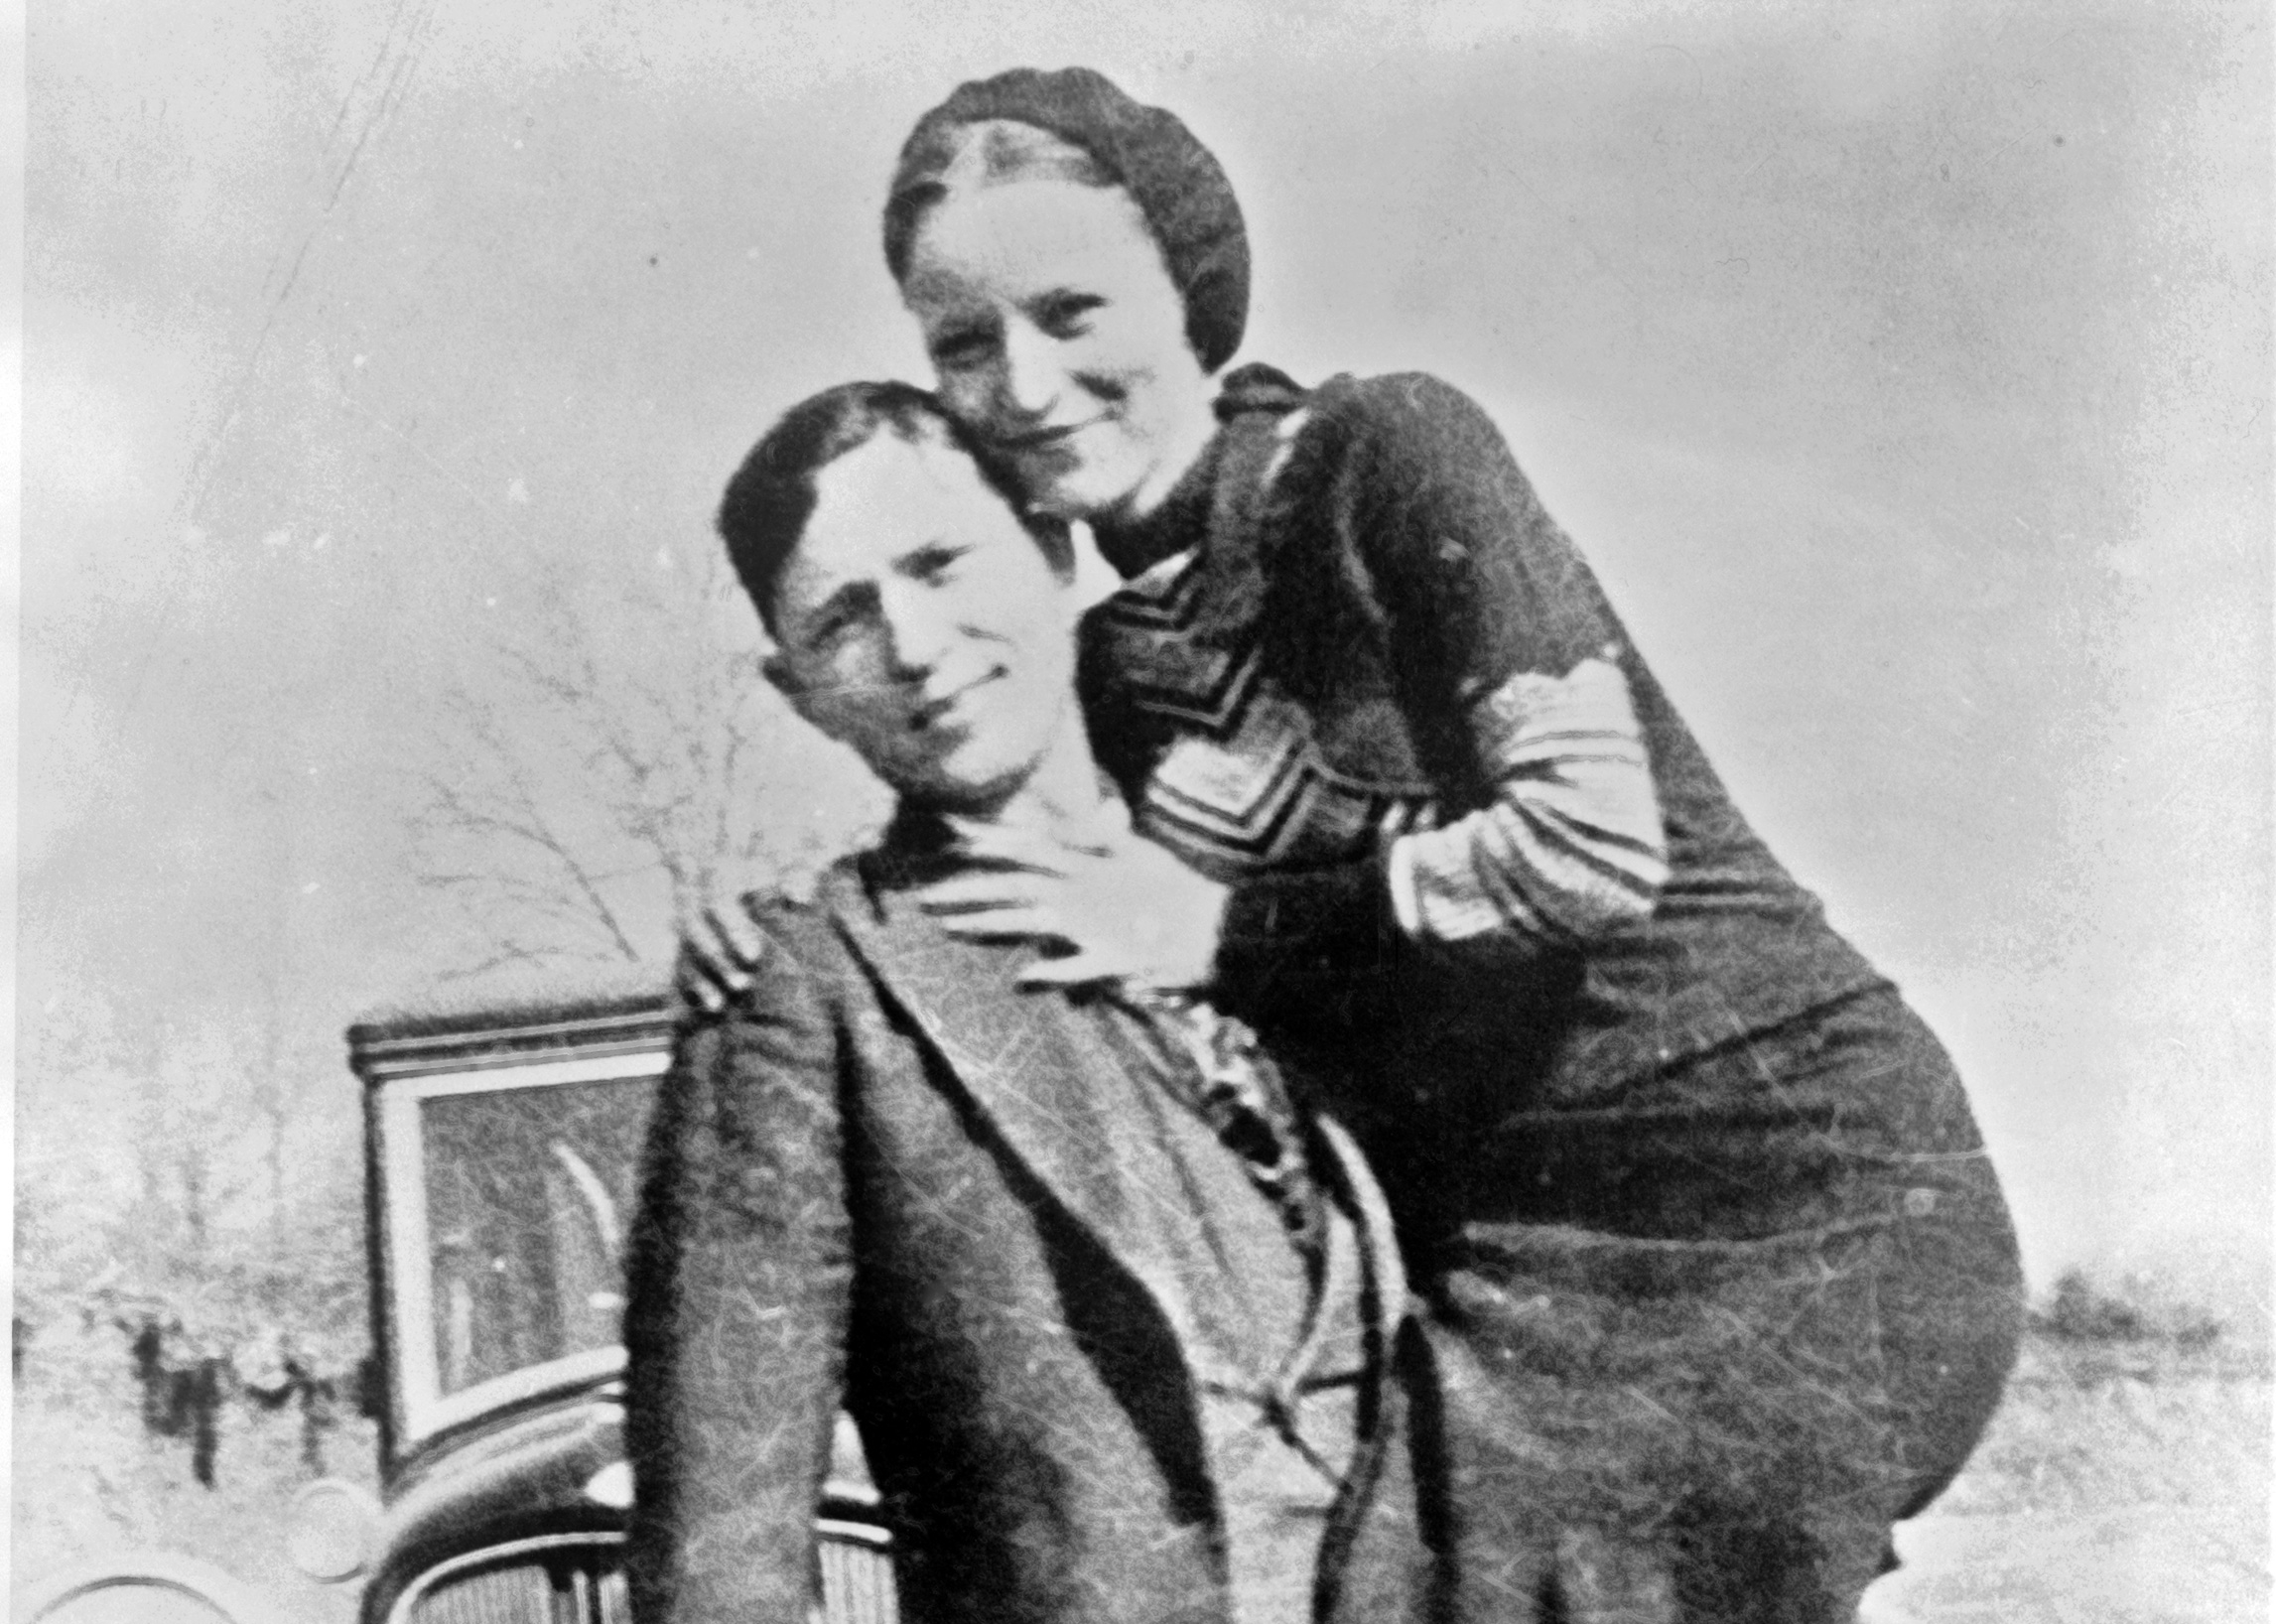 BOSTON—Bonnie and Clyde made it quite clear how they felt about a former me...